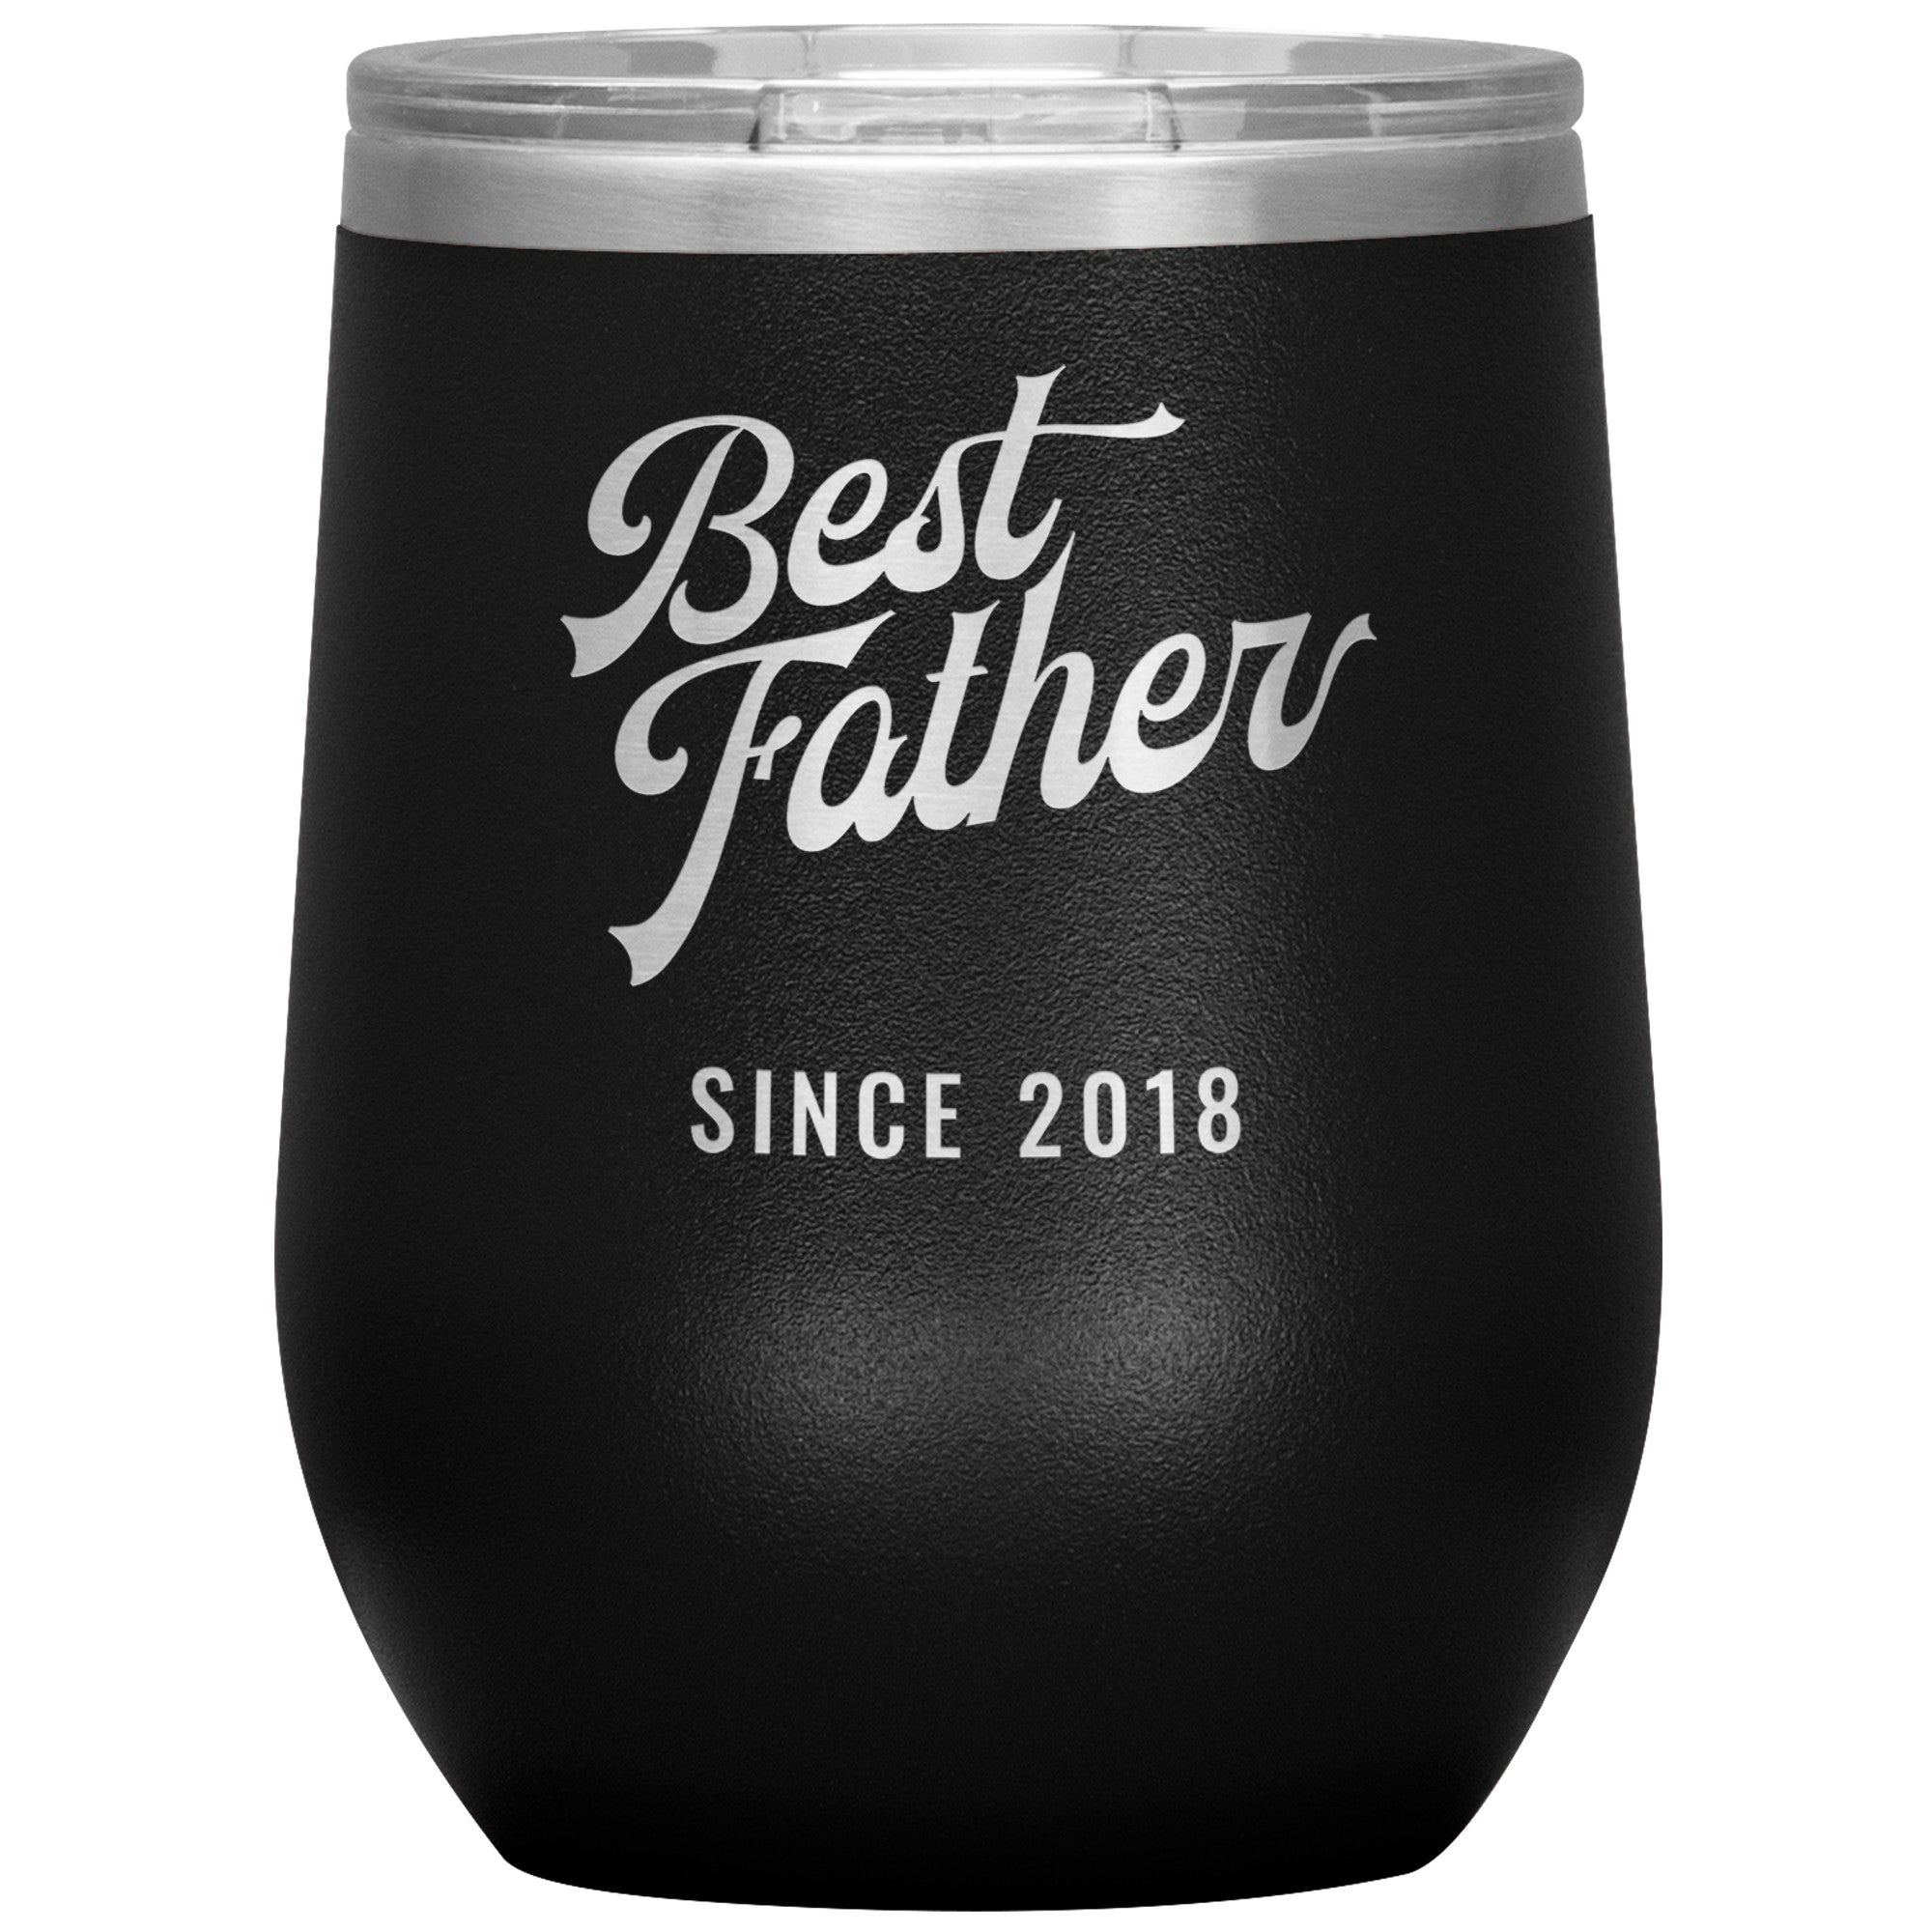 Best Father Since 2018 - 12oz Insulated Wine Tumbler